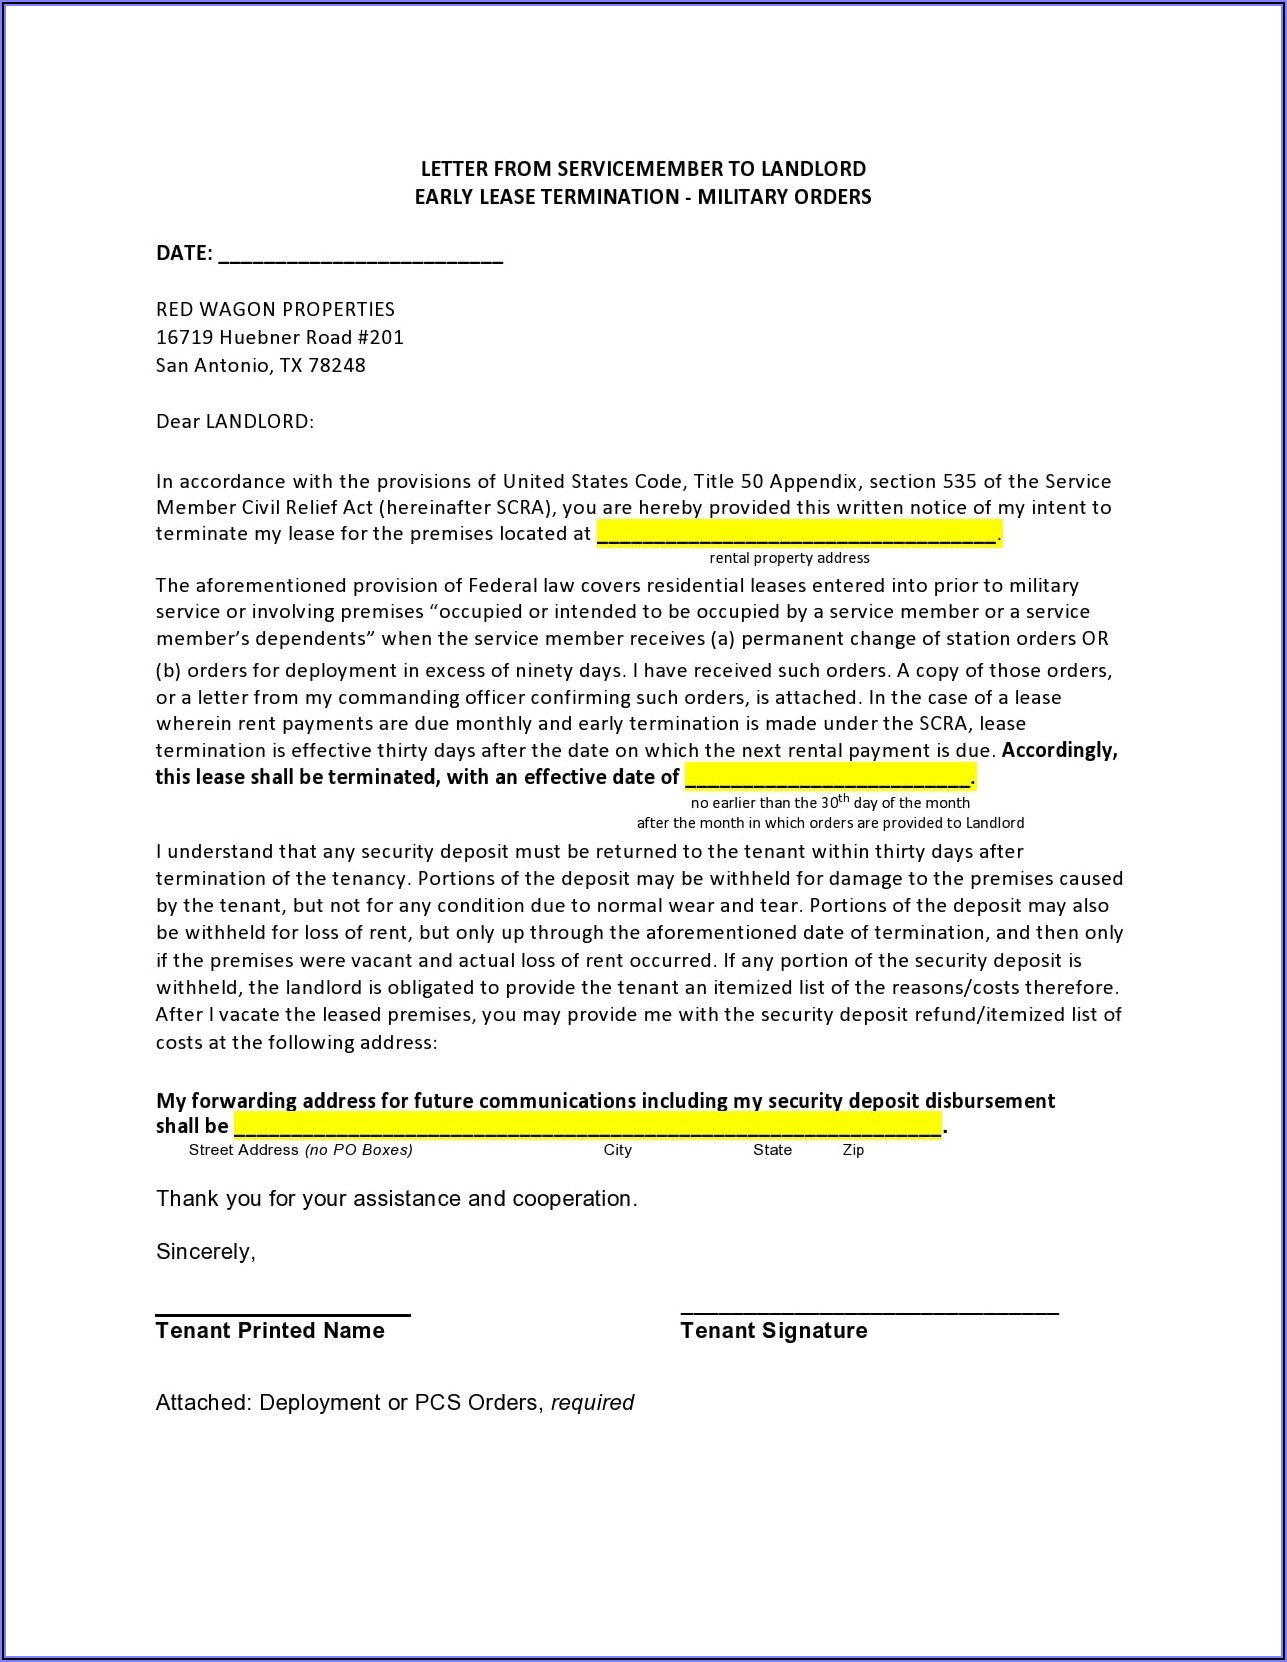 Early Commercial Lease Termination Letter To Landlord